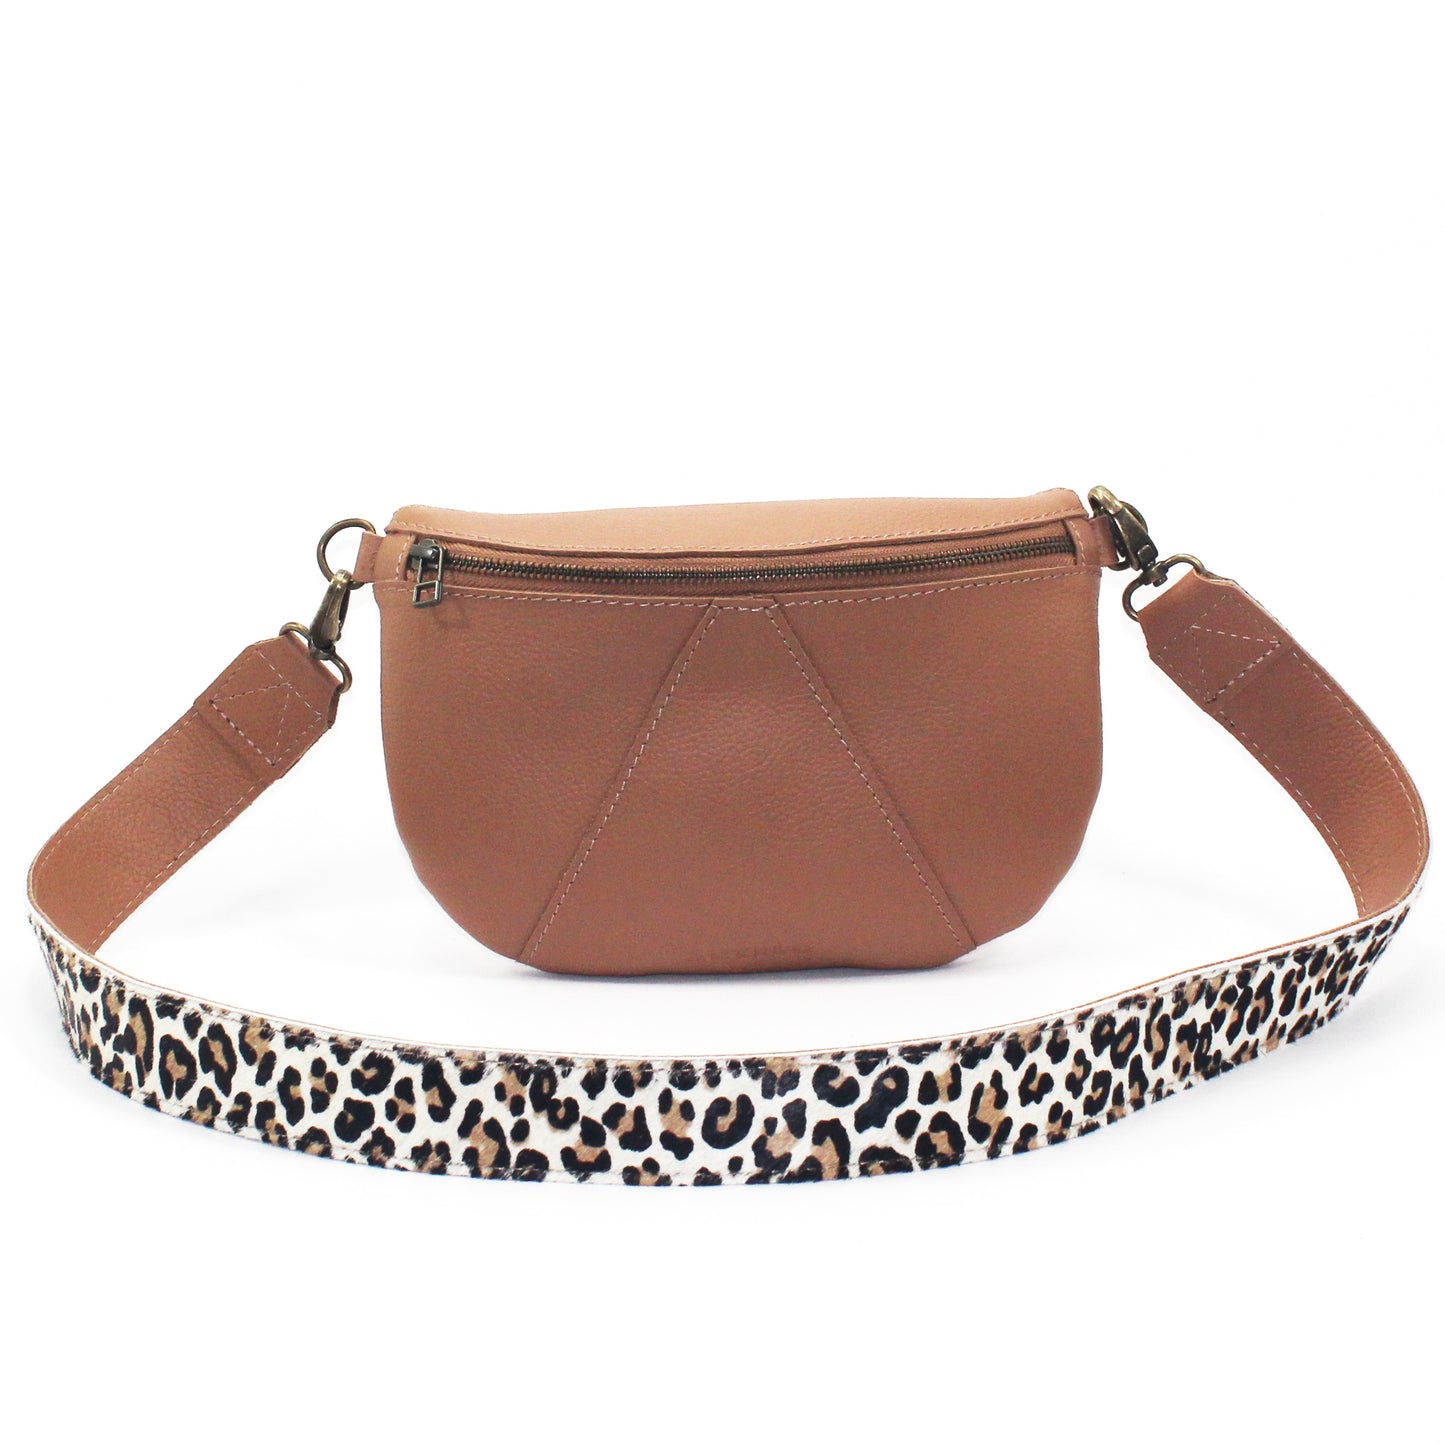 Ruby Eclipse leather crossbody with Wild leather strap